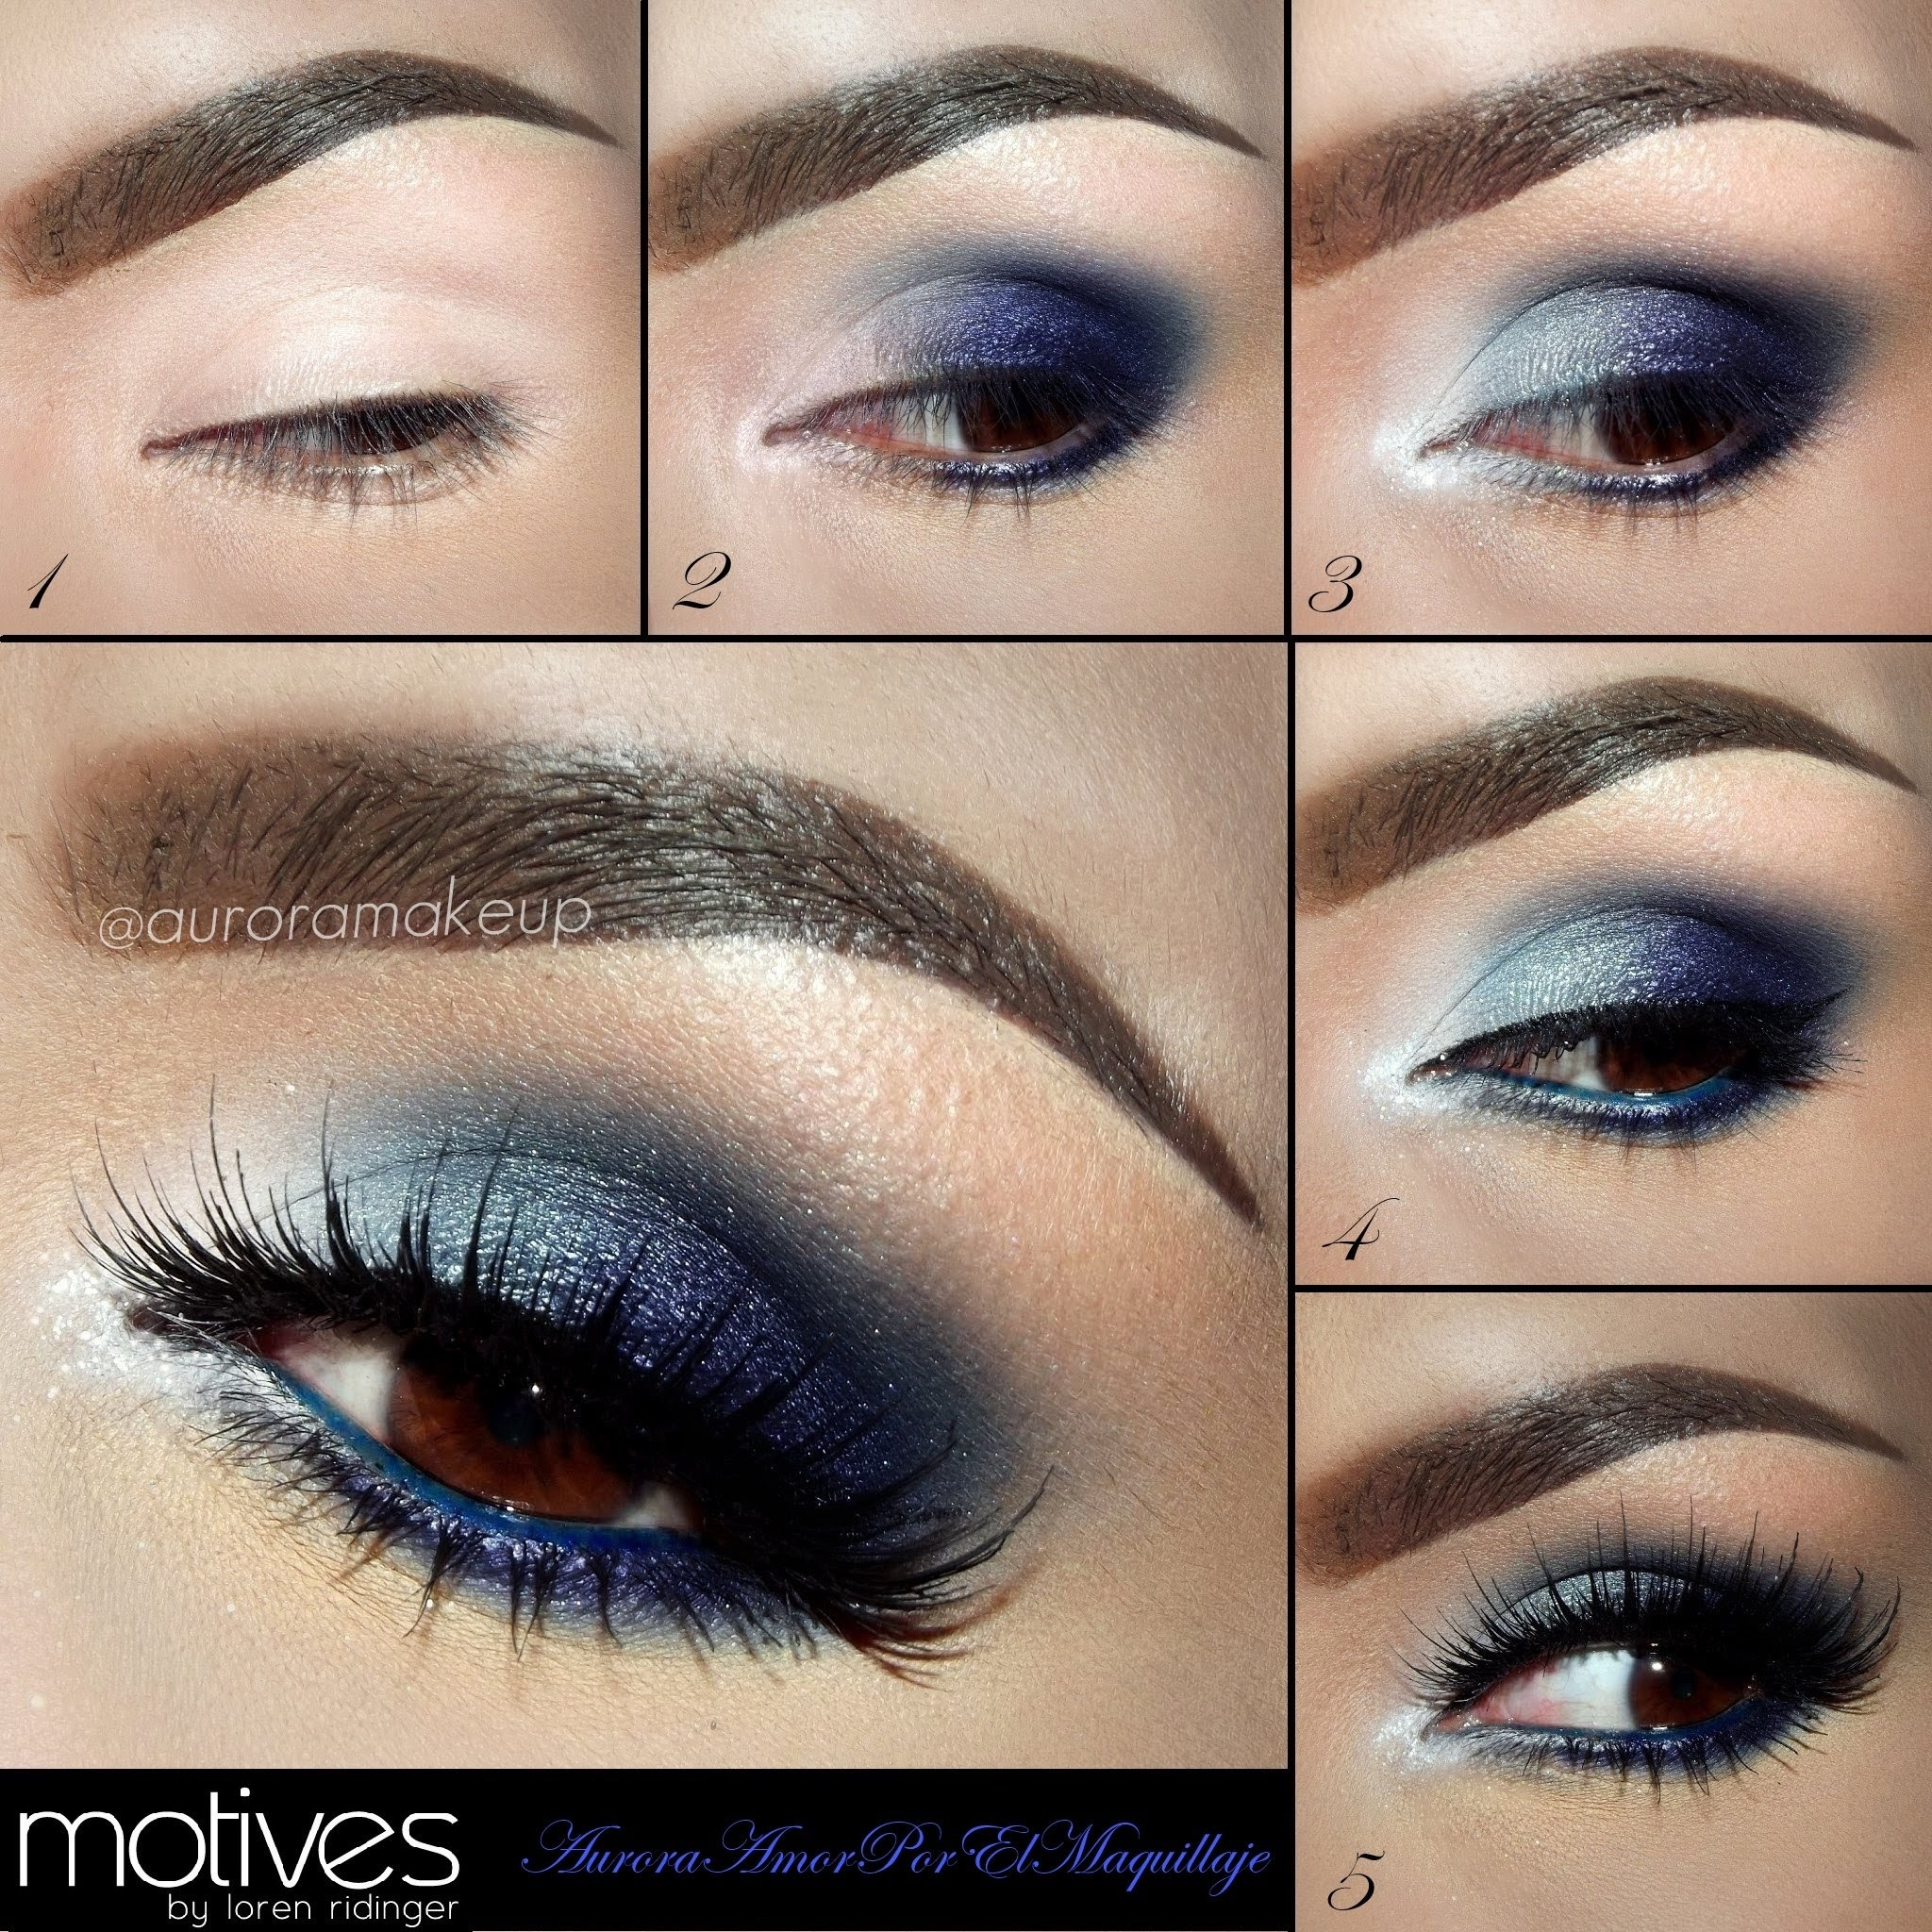 How To Do Eye Makeup For Brown Eyes Blue Eye Shadow For Brown Eyes Tutorial With Aurora Makeup And